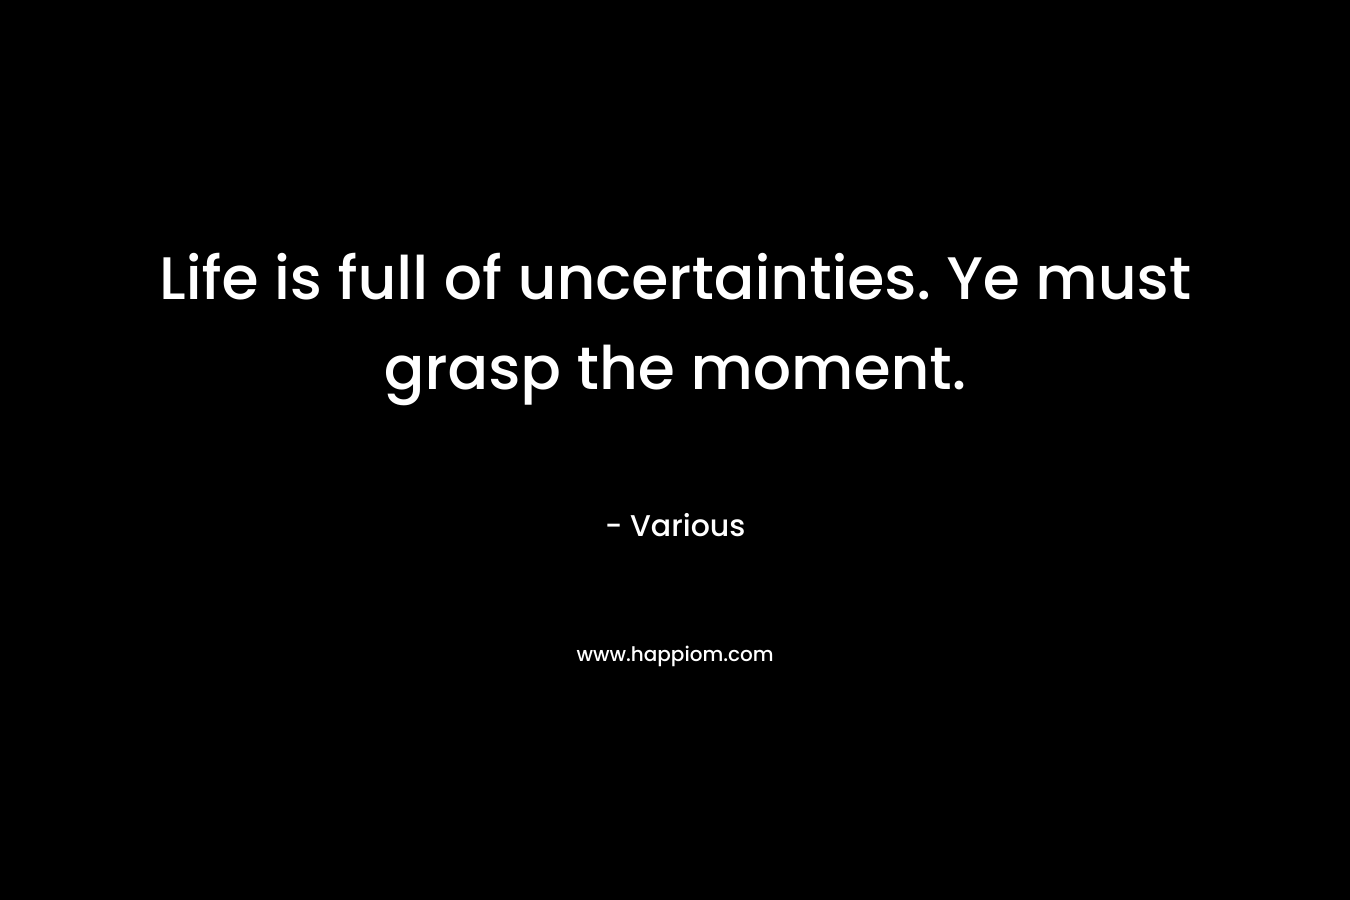 Life is full of uncertainties. Ye must grasp the moment.